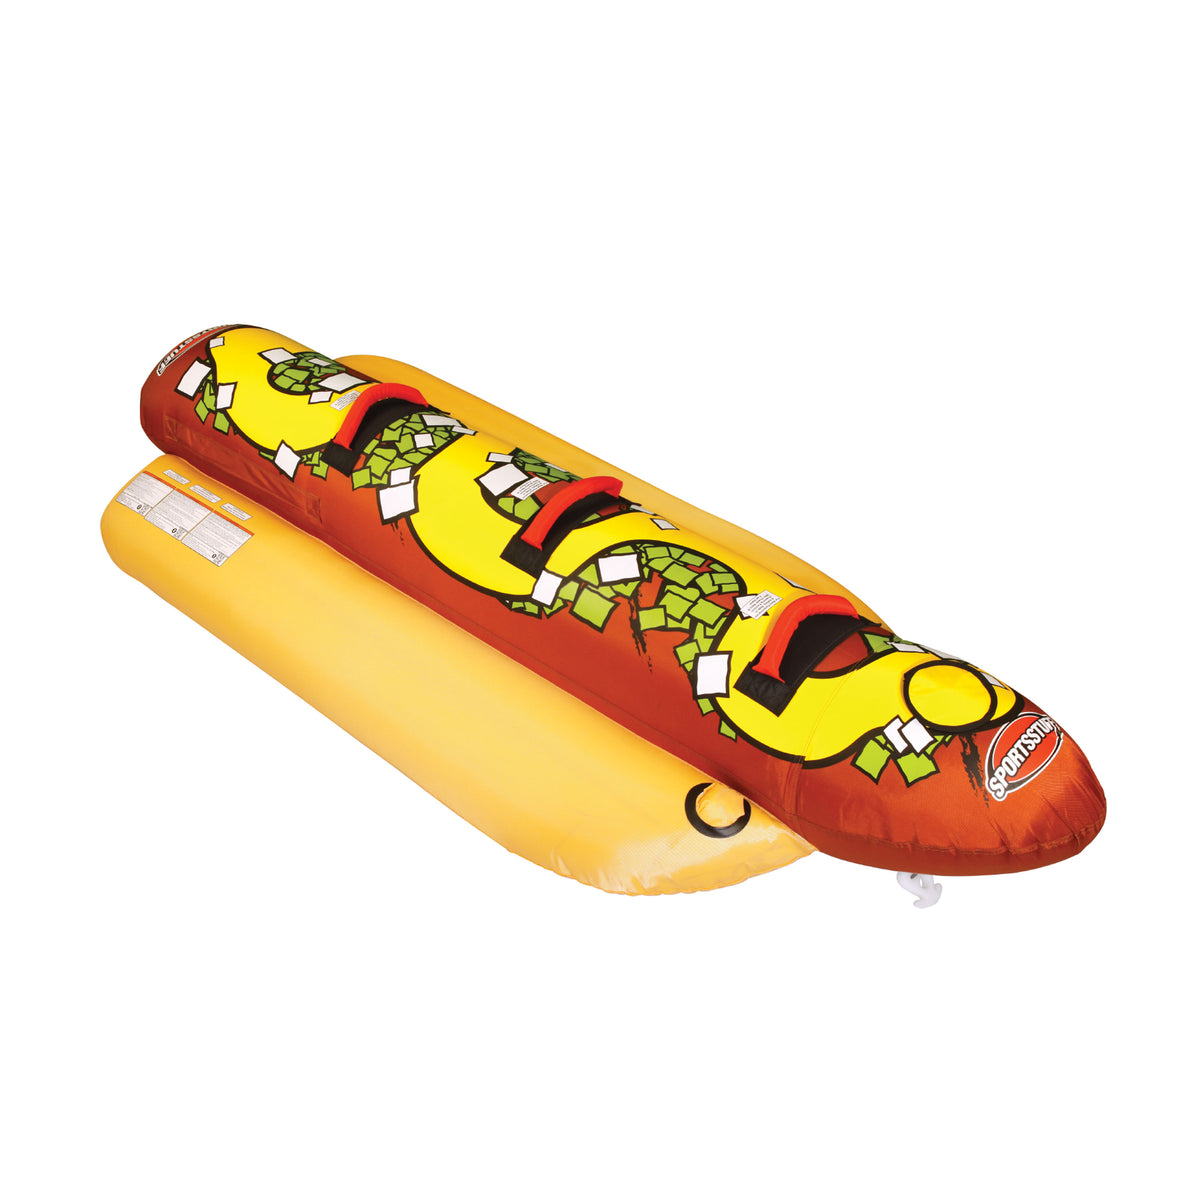 Sportsstuff 53-3055 Hot Dog 2 Inflatable Double Rider Towable